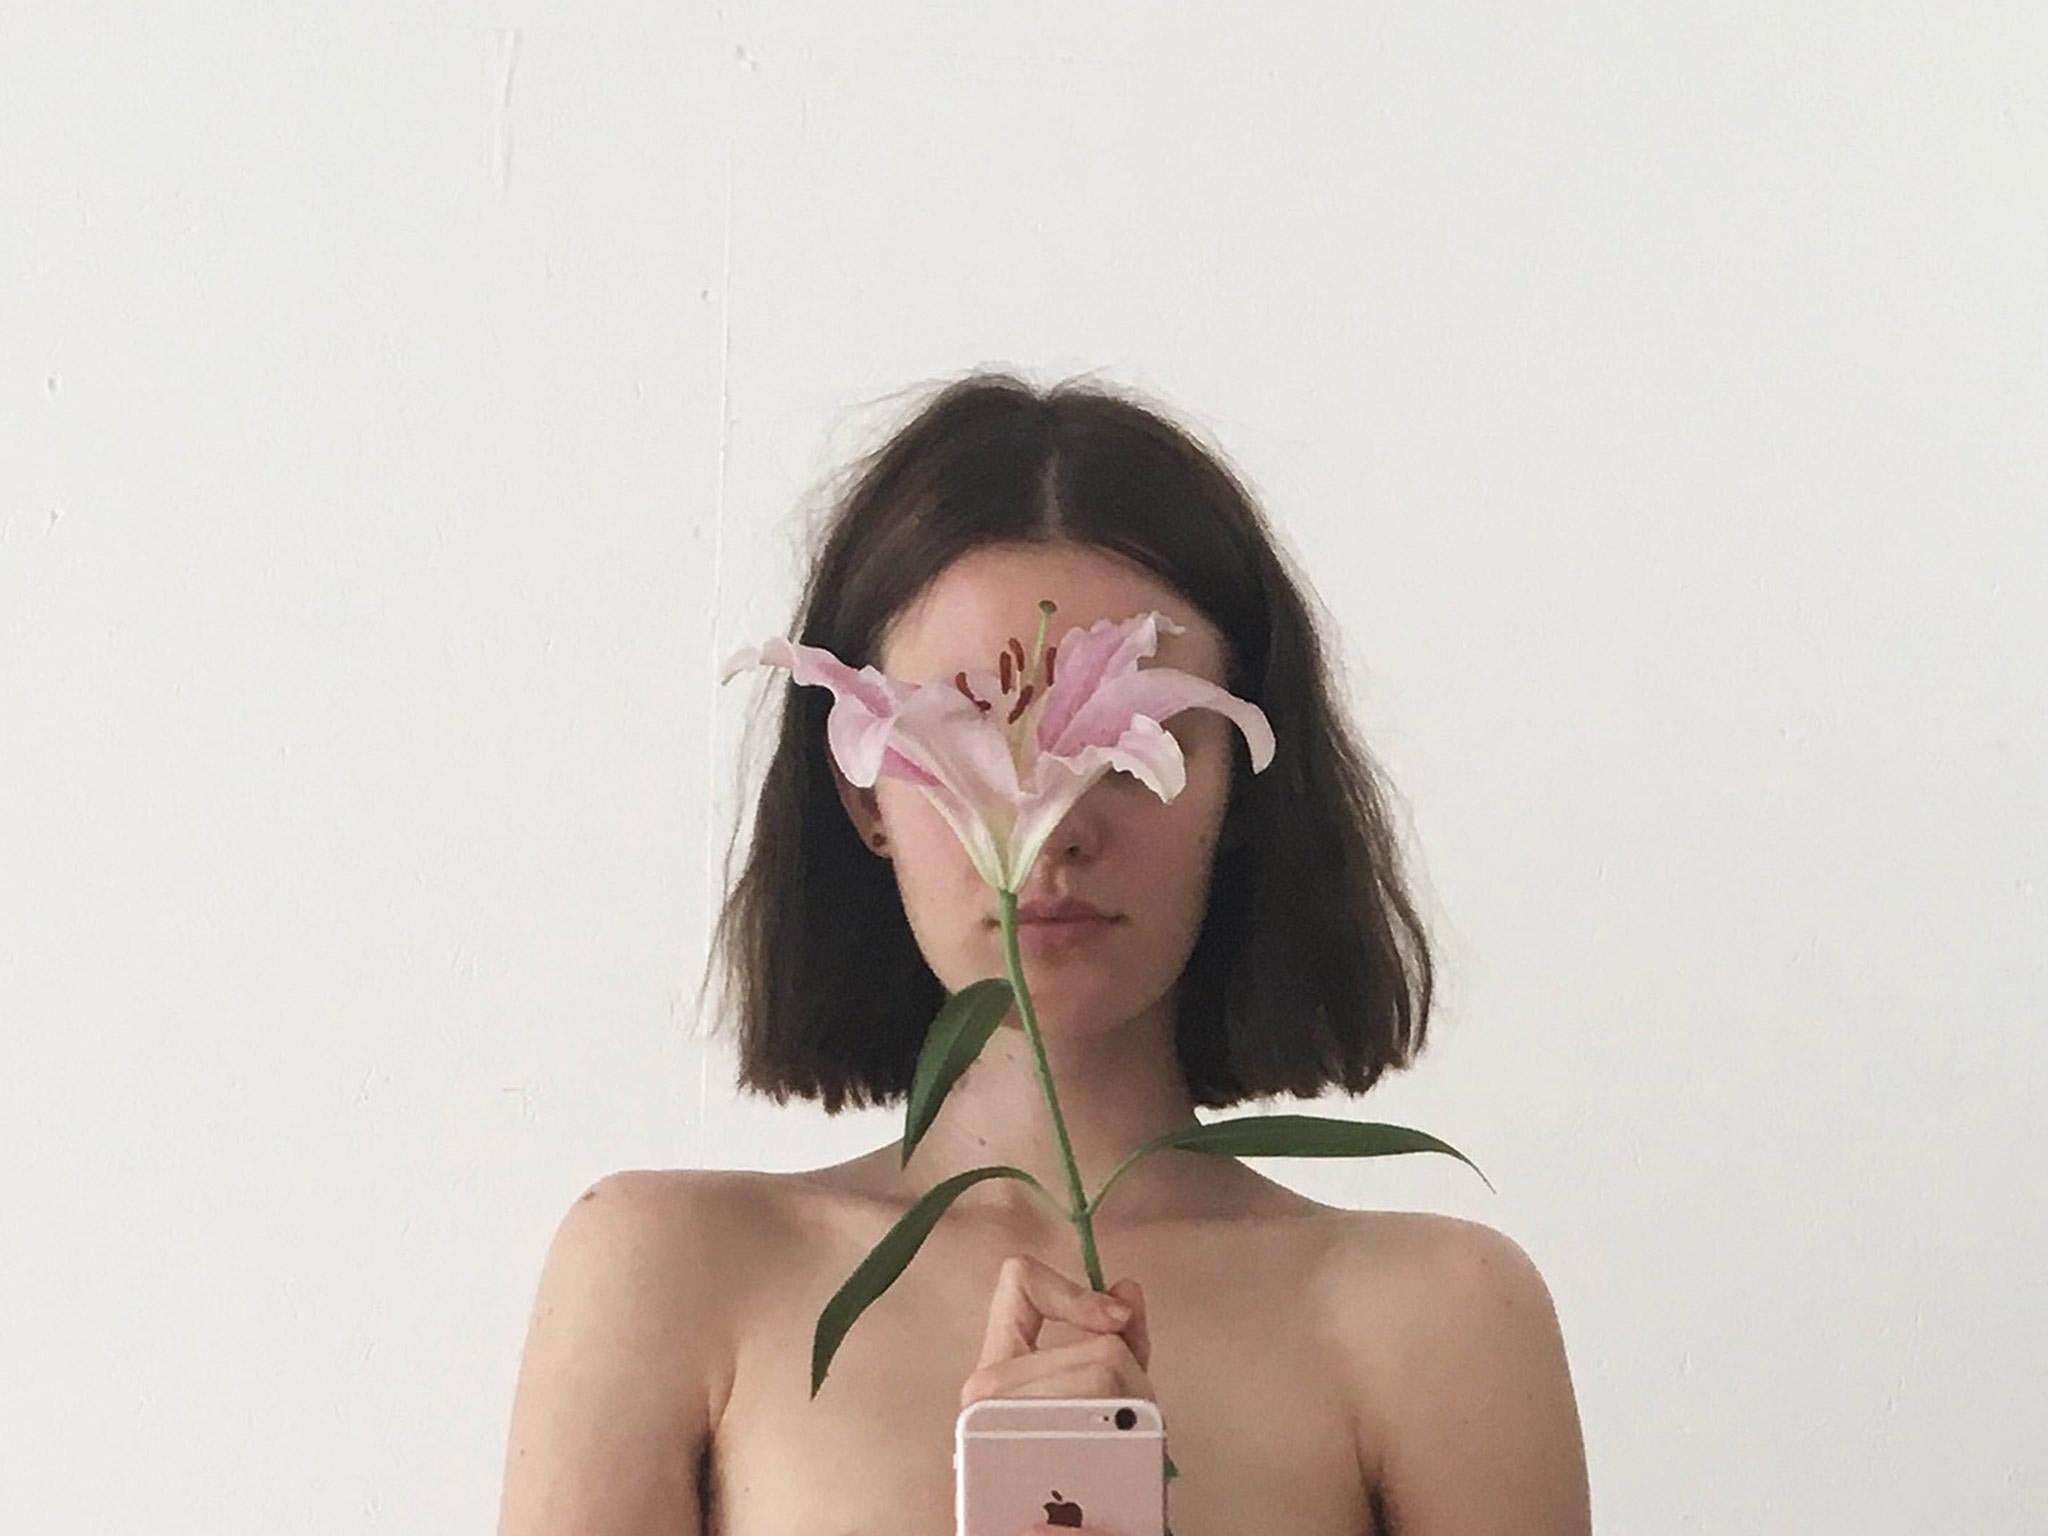 Body Hair And Sexuality The Banned Photos Instagram Doesnt Want You